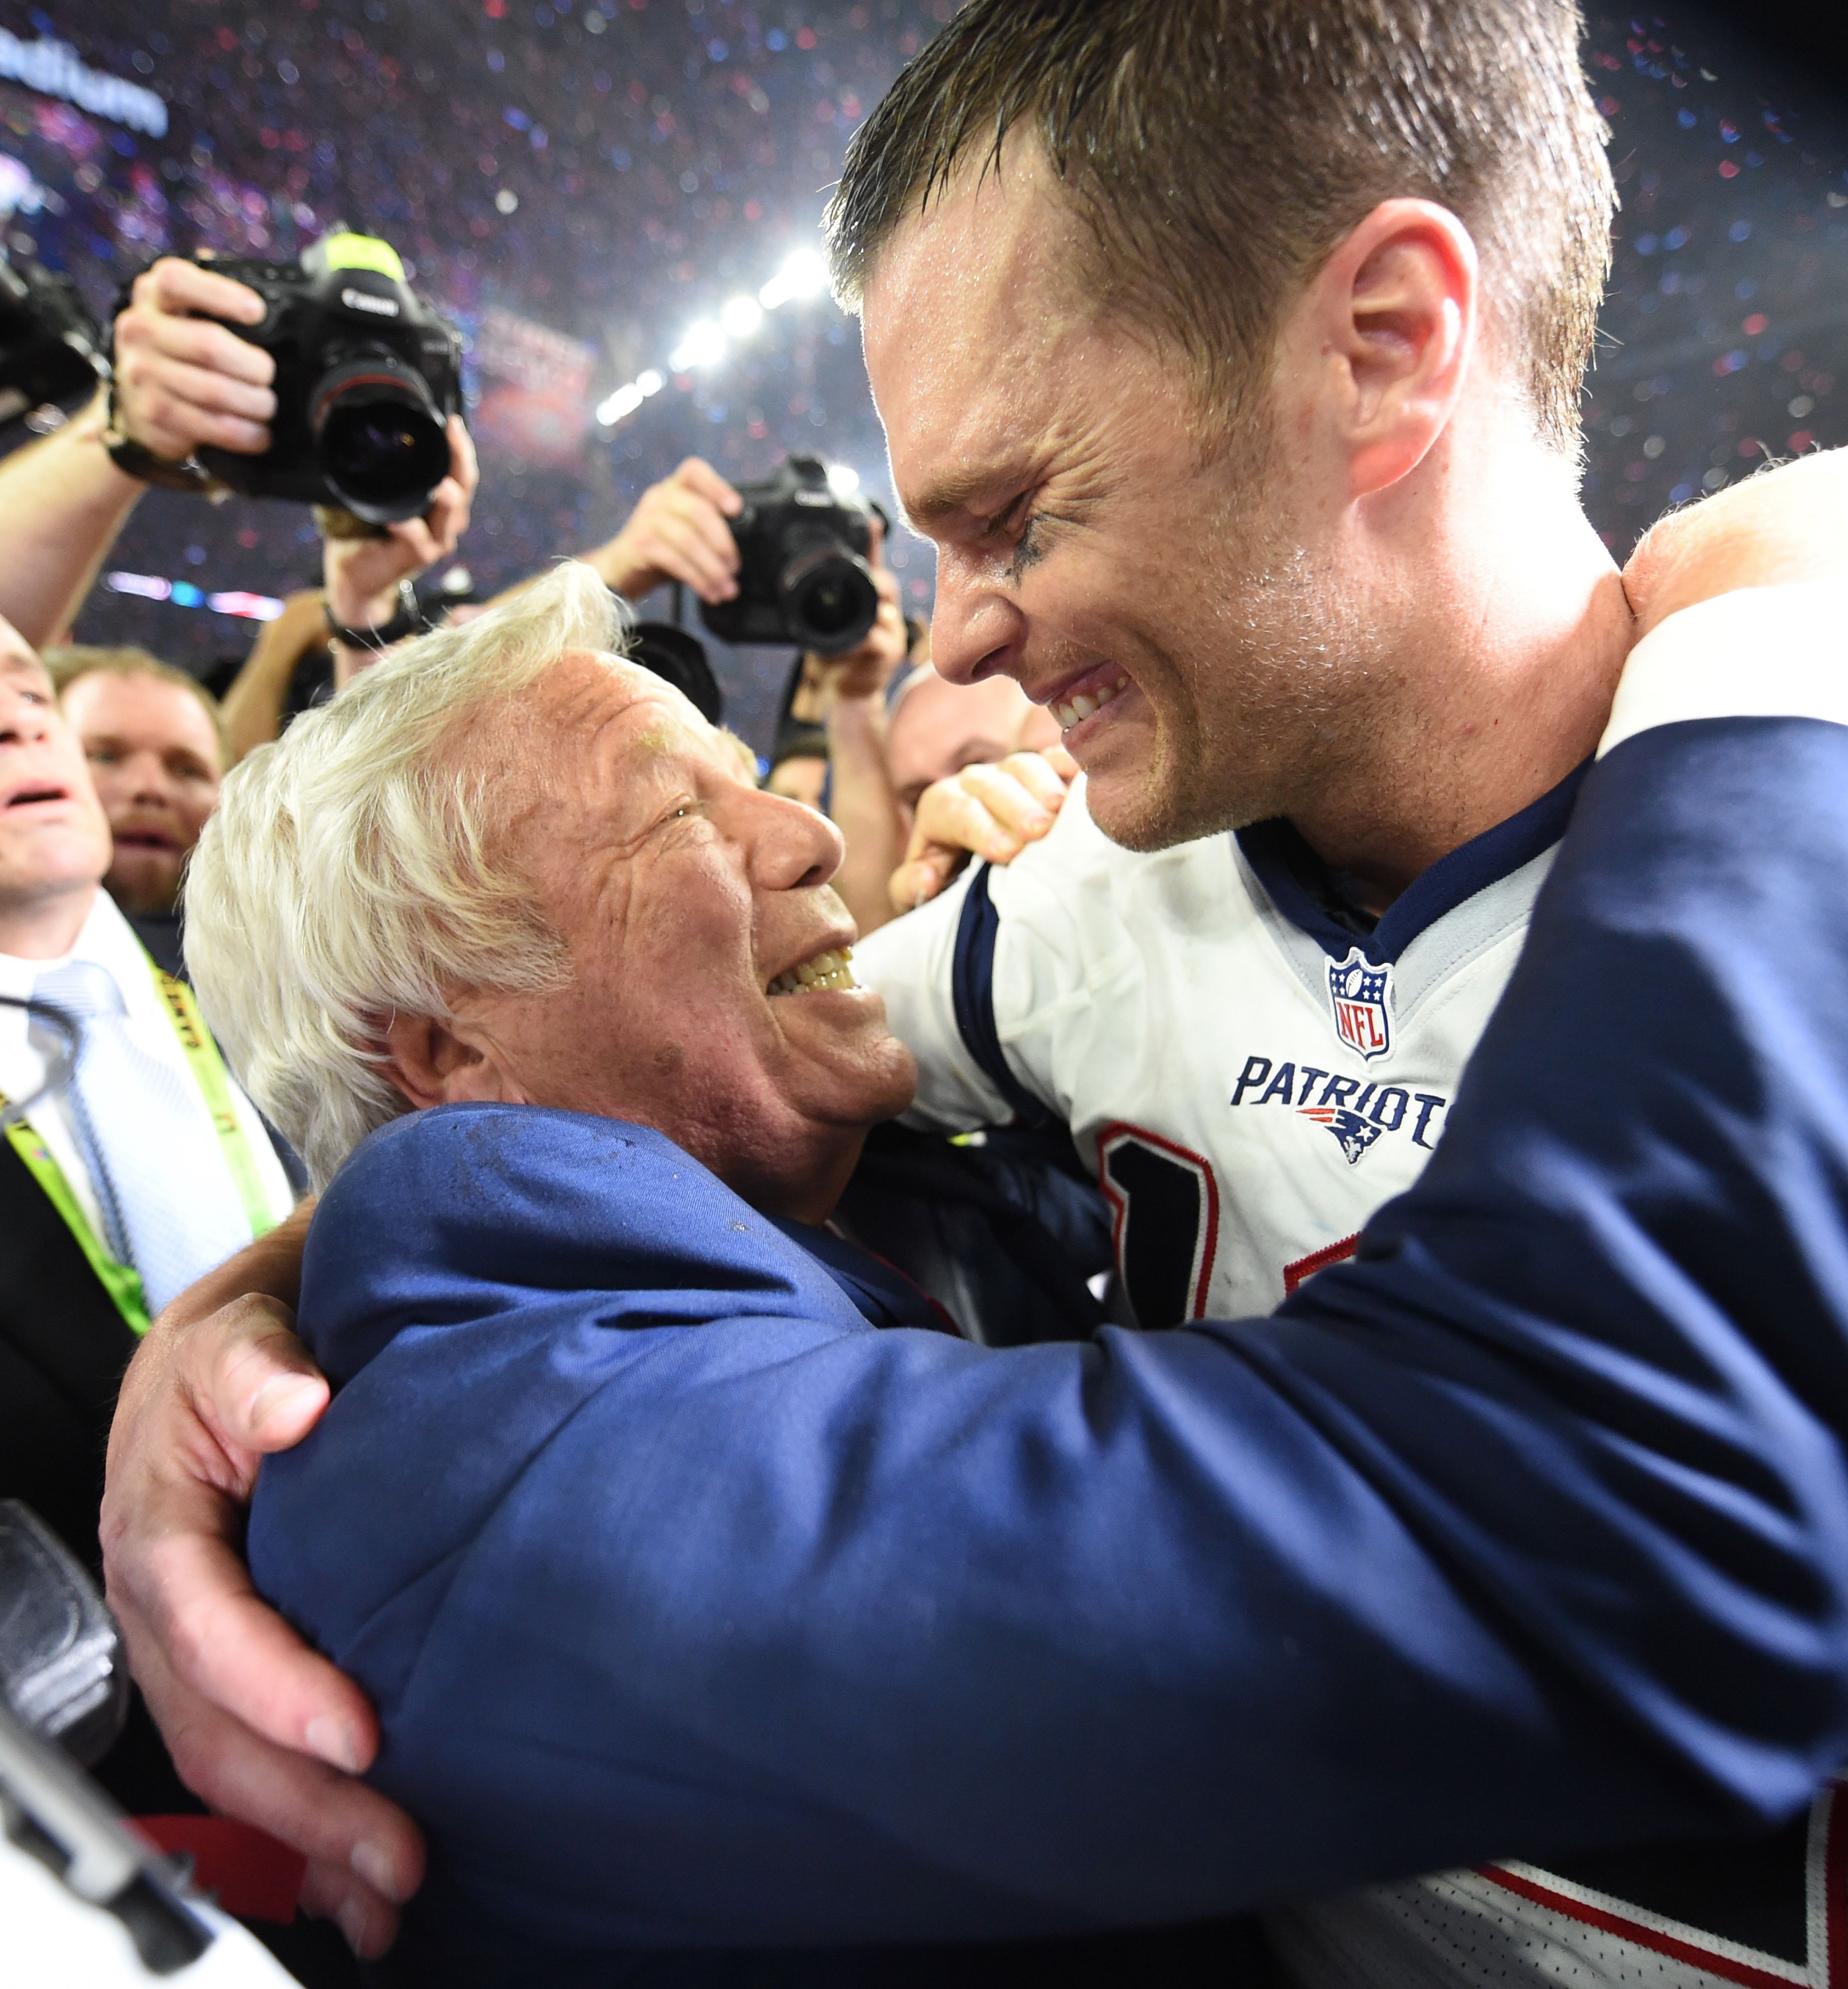 New England Patriots owner Robert Kraft, whose team won the Super Bowl earlier this month, denies charges of soliciting prostitution. Photo: AFP